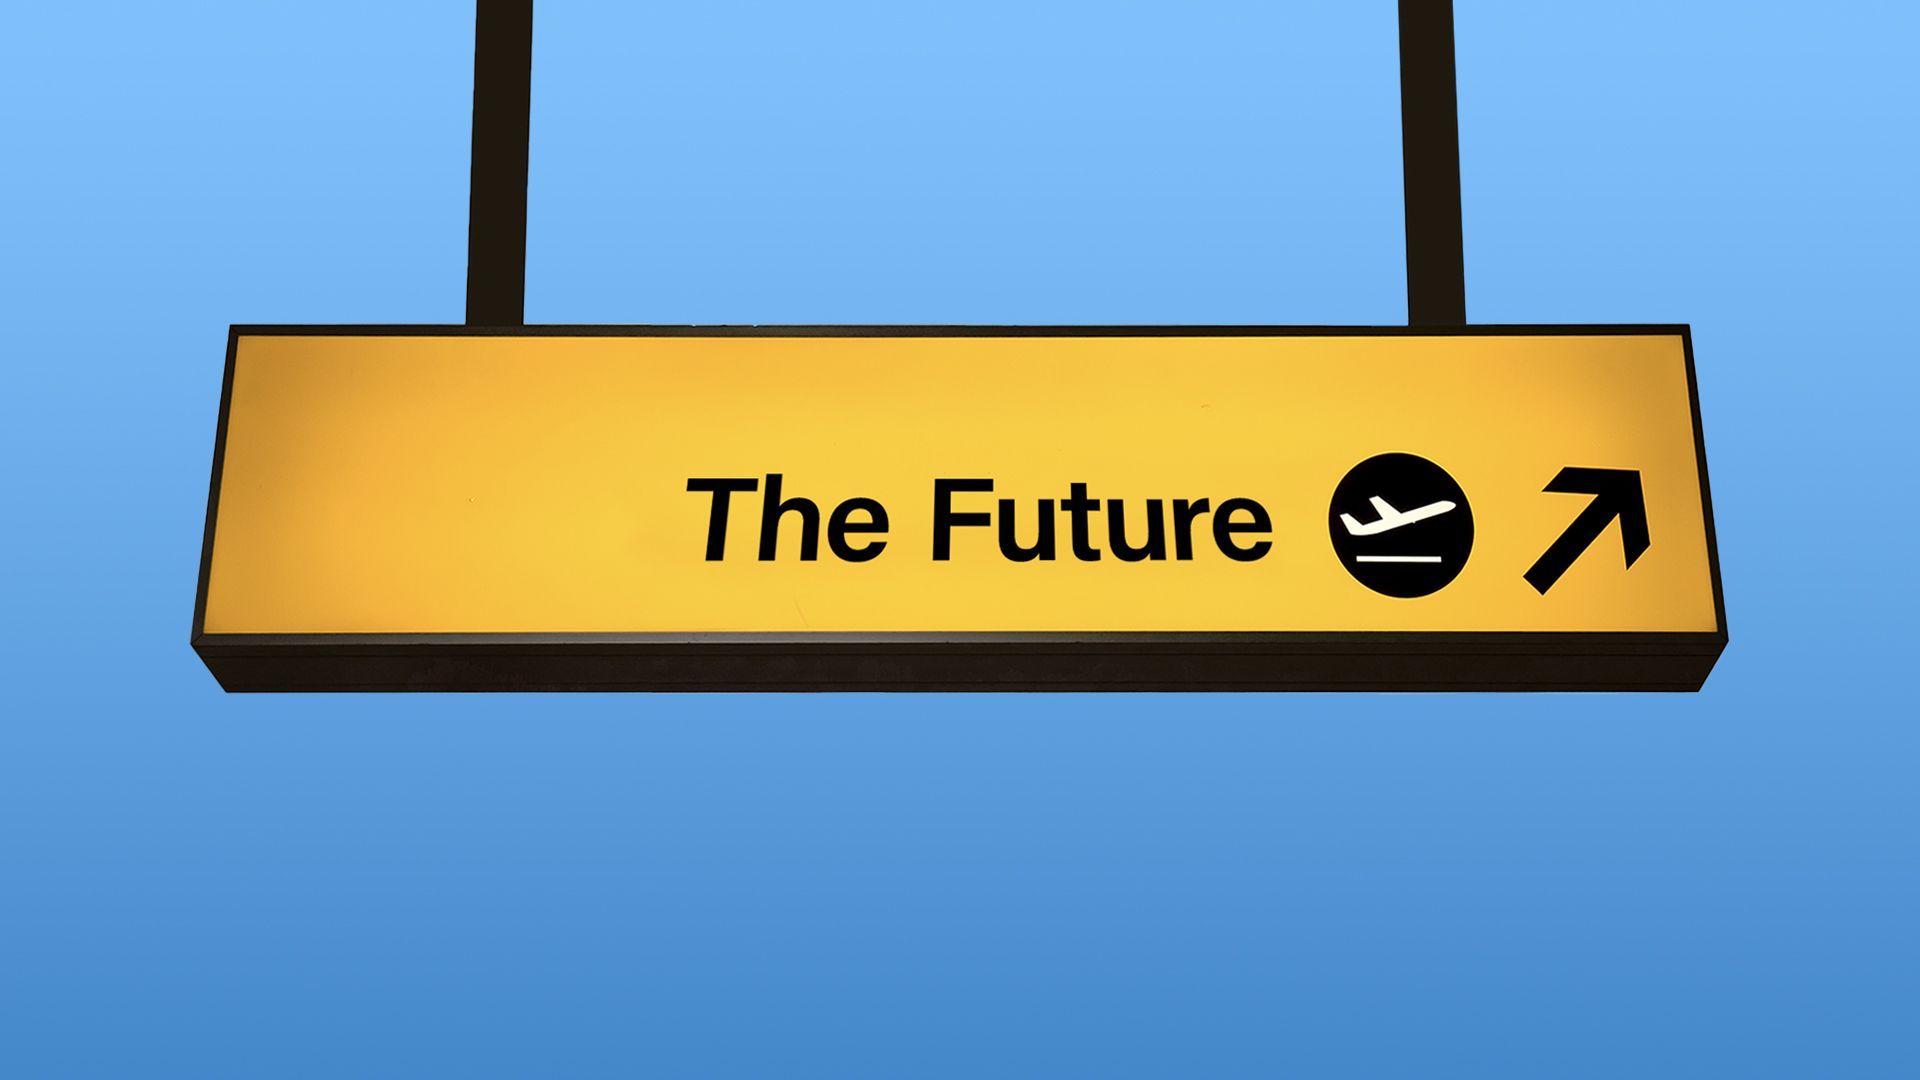 Illustration of an airport sign that says "The Future"